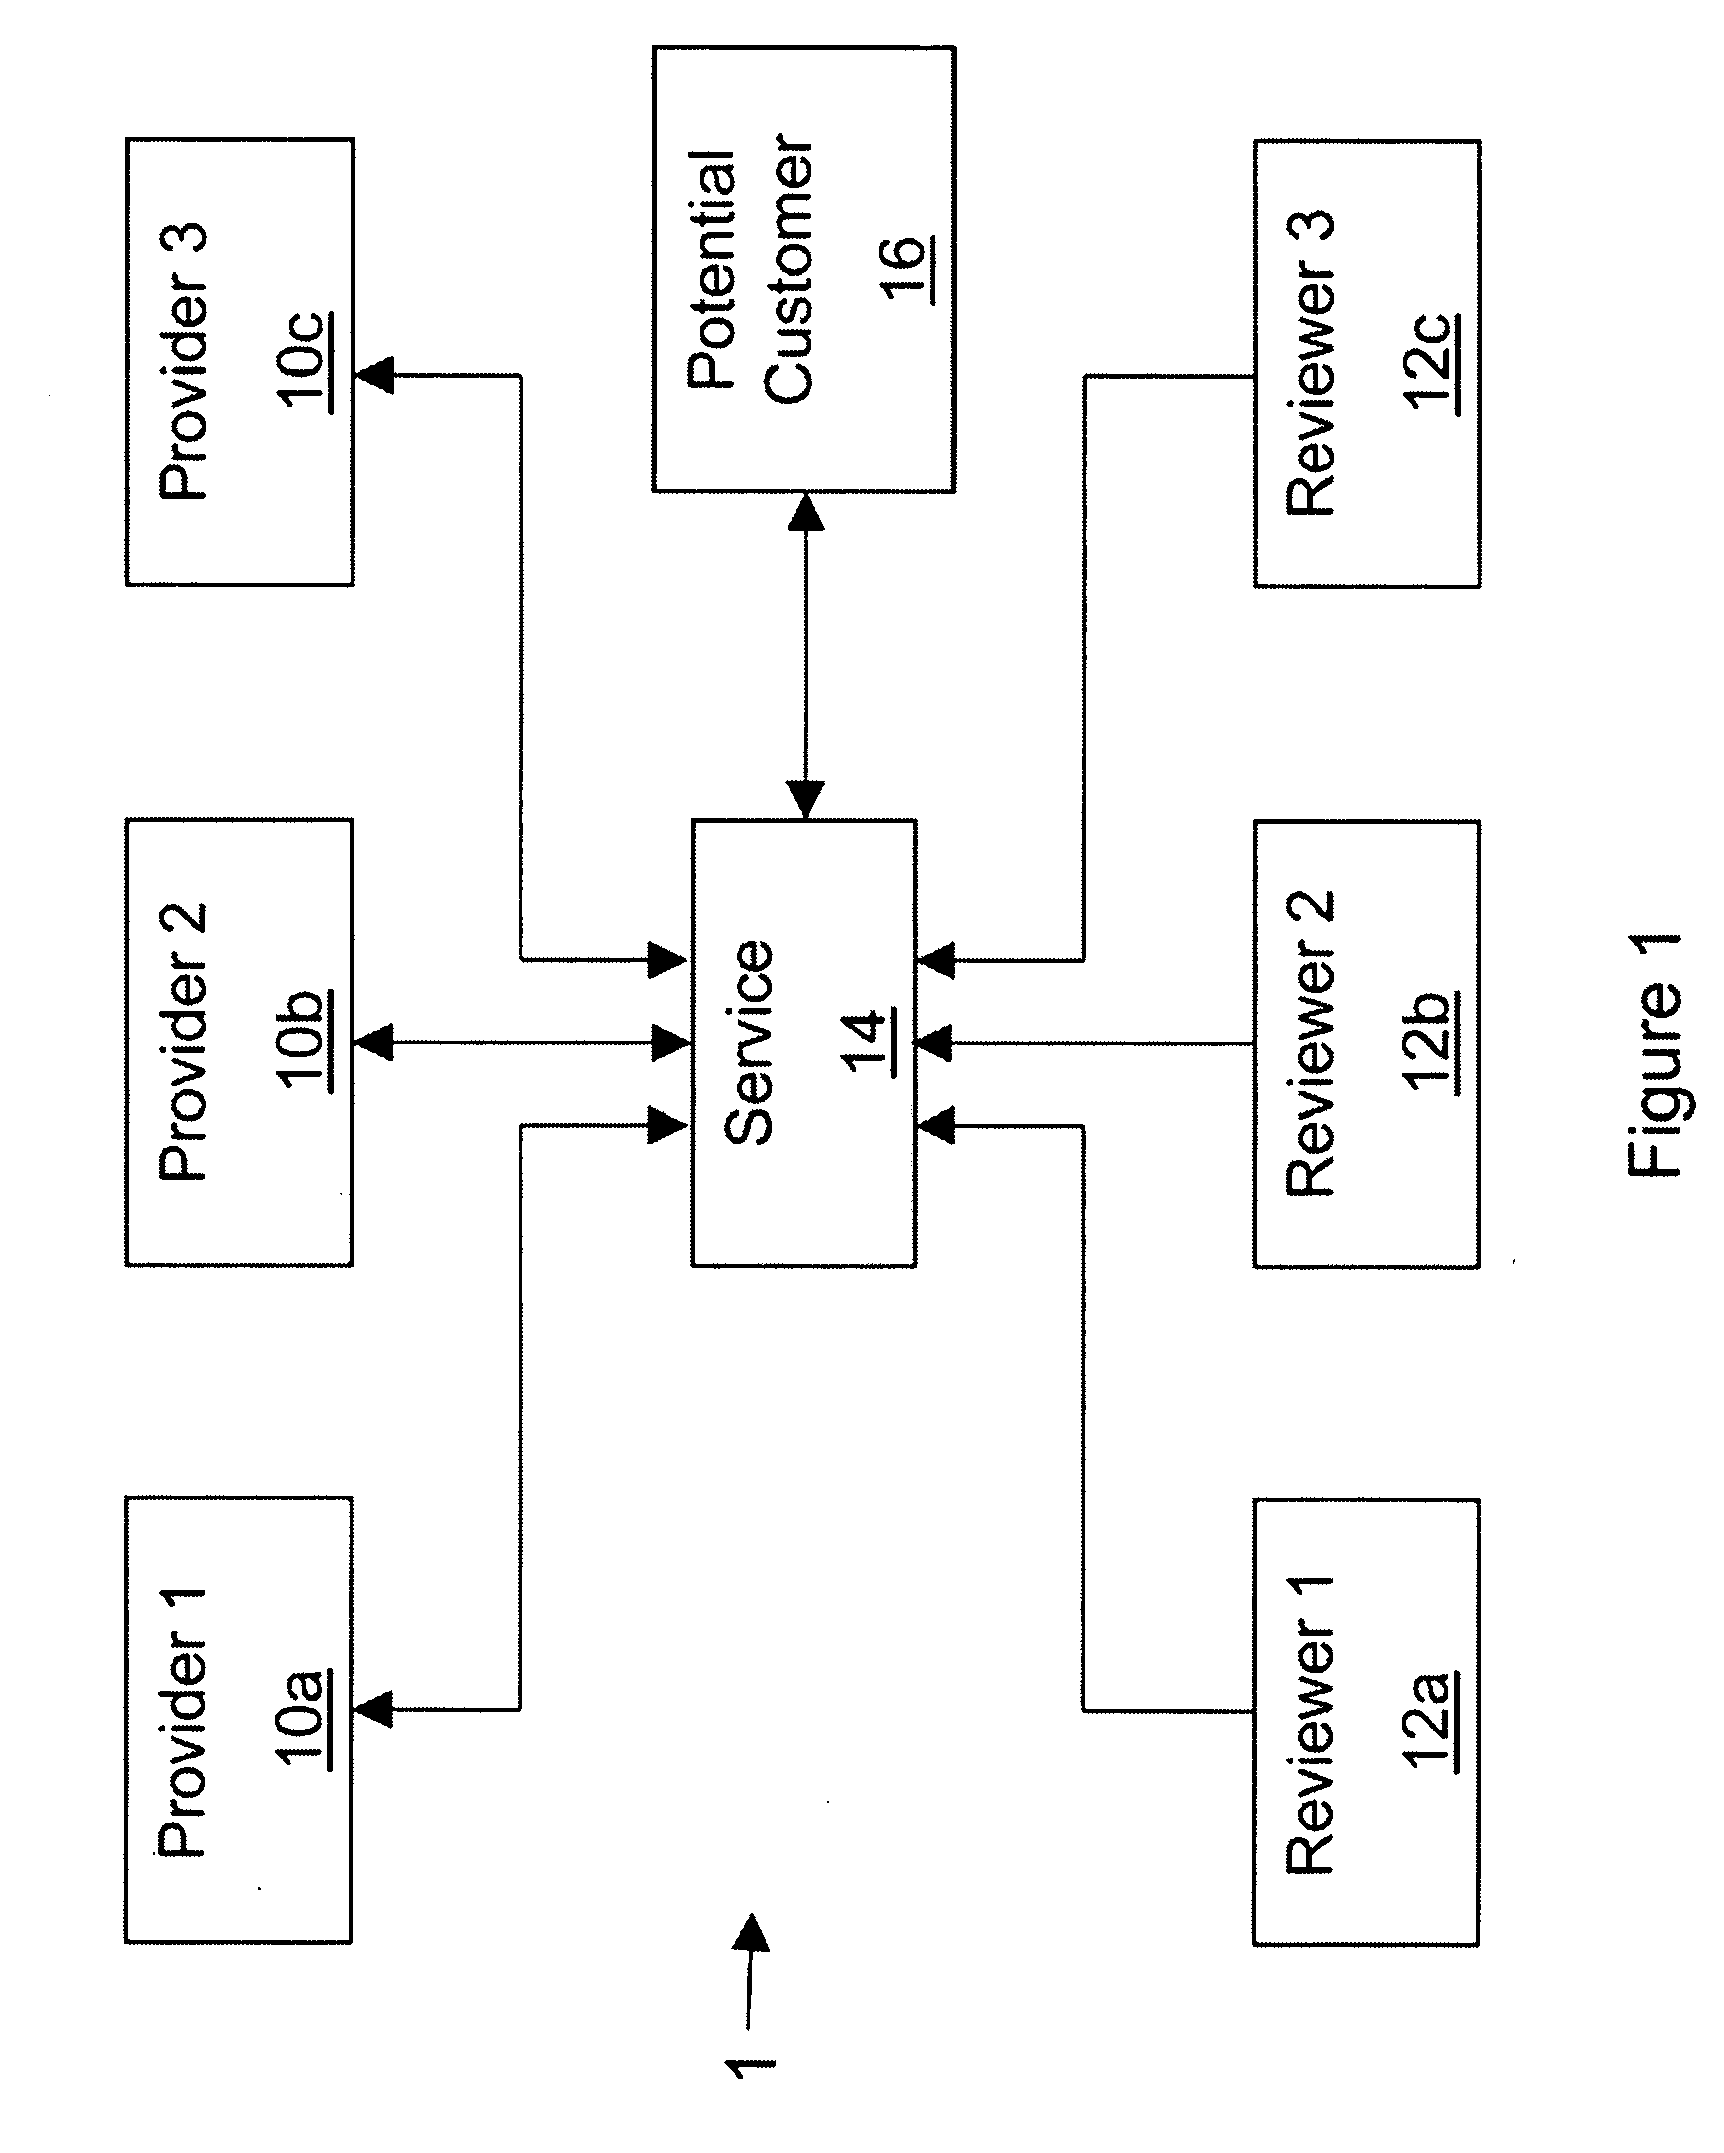 Adult care information system and method